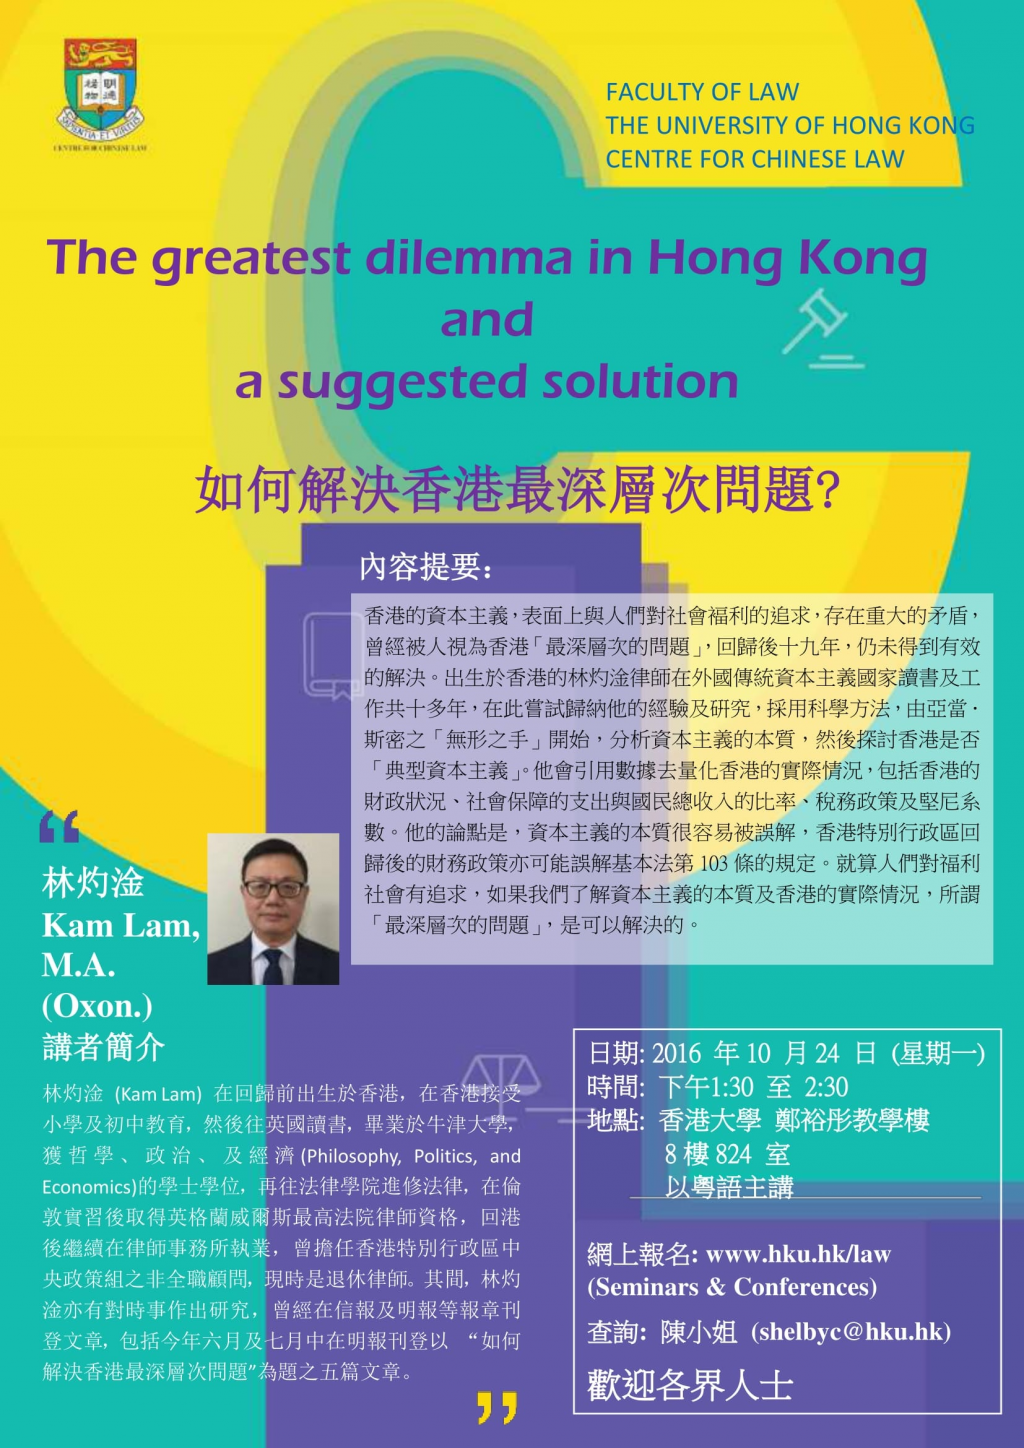 The greatest dilemma in Hong Kong and a suggested solution